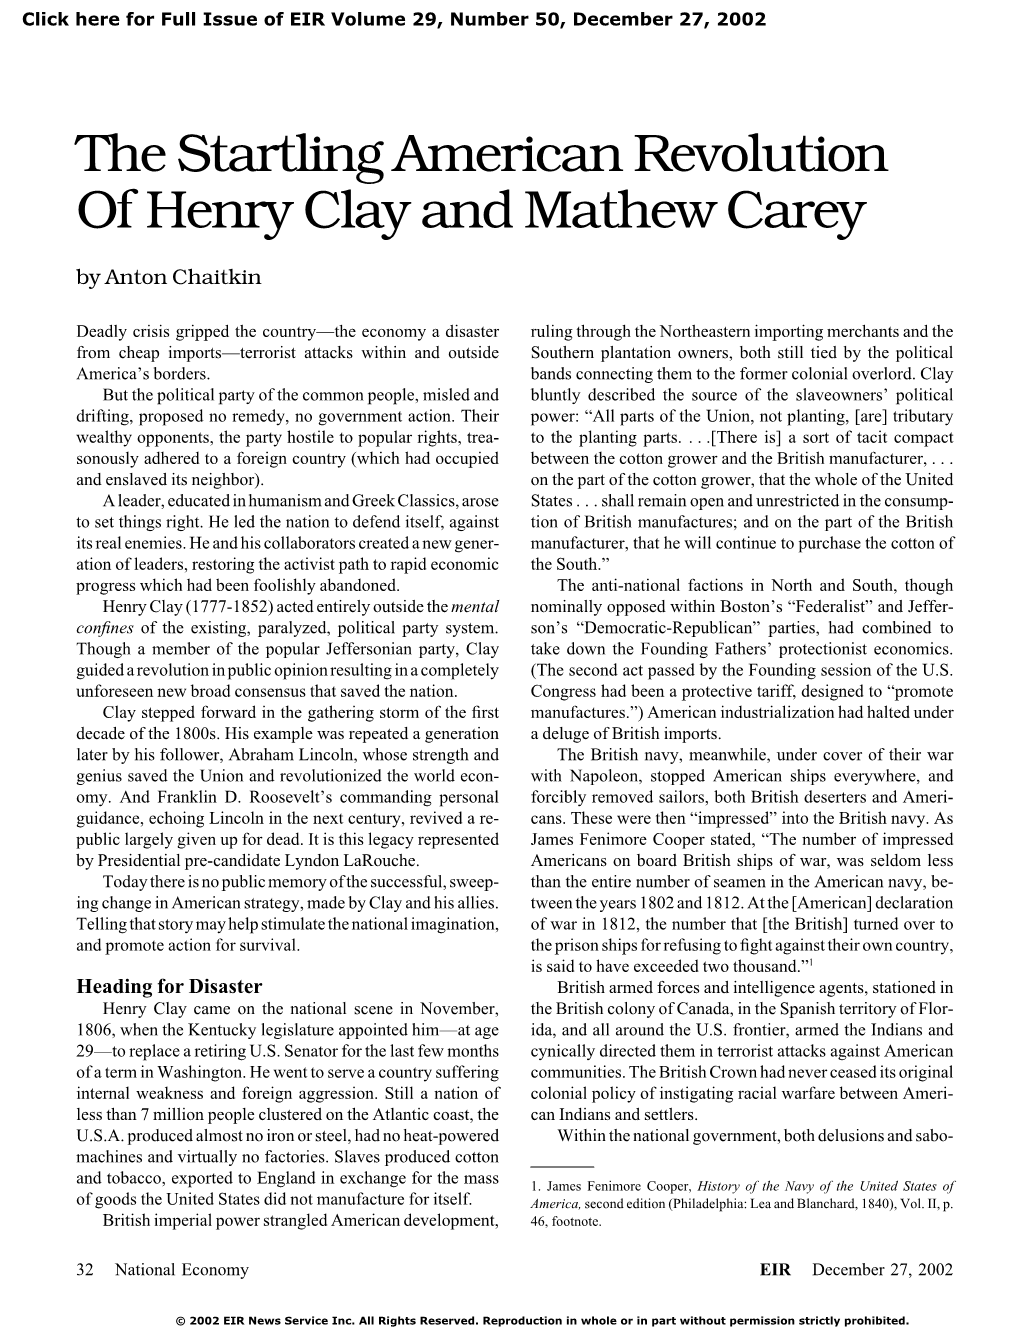 The Startling American Revolution of Henry Clay and Mathew Carey